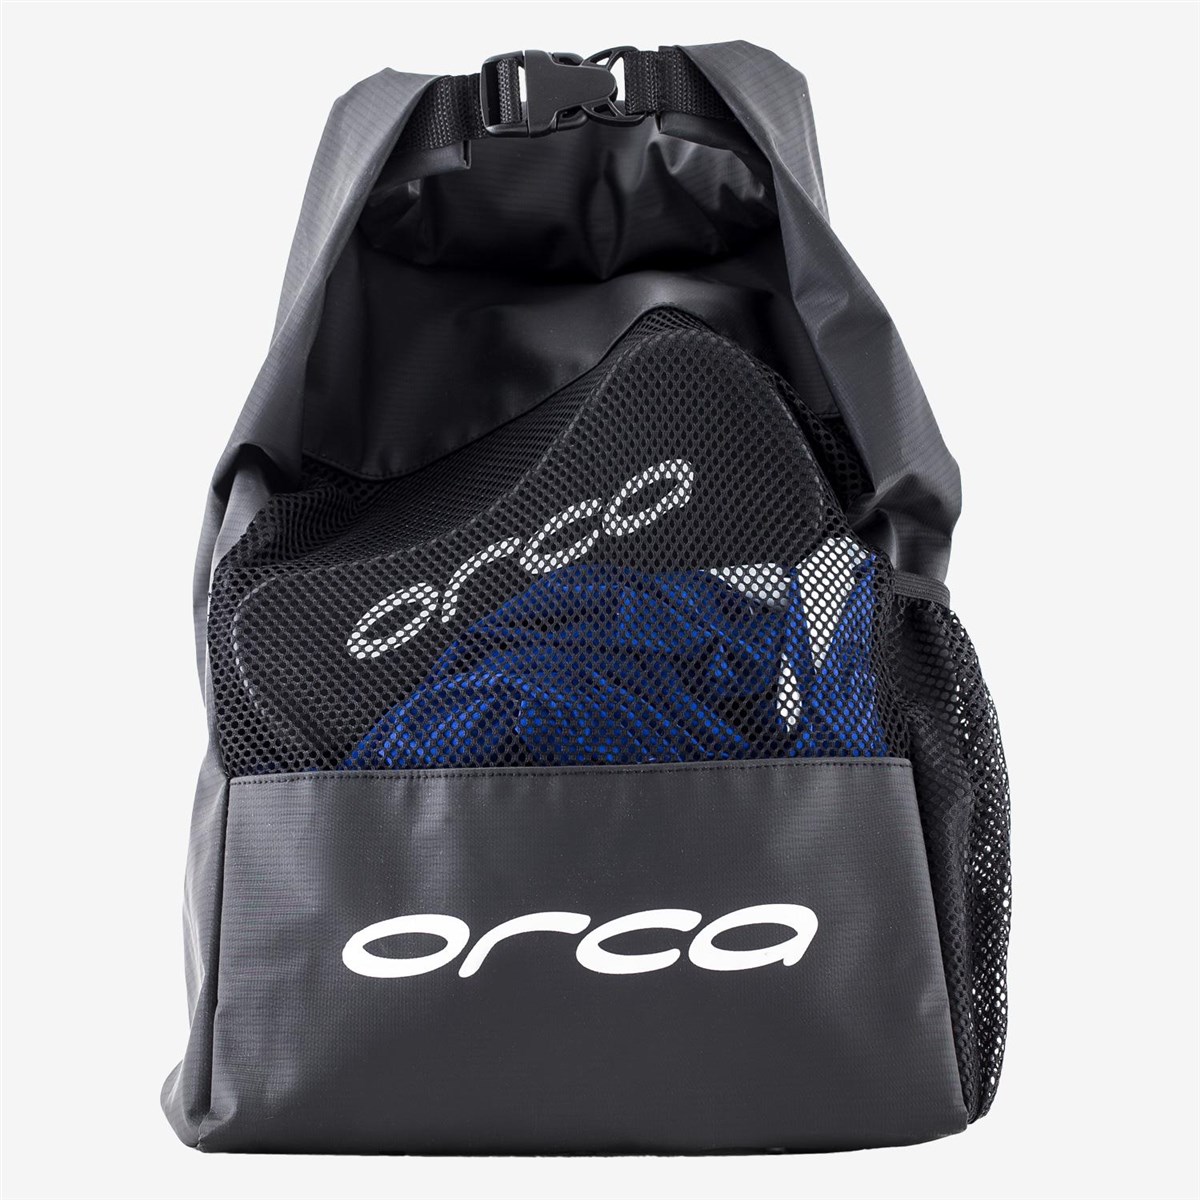 Orca Mesh Backpack product image